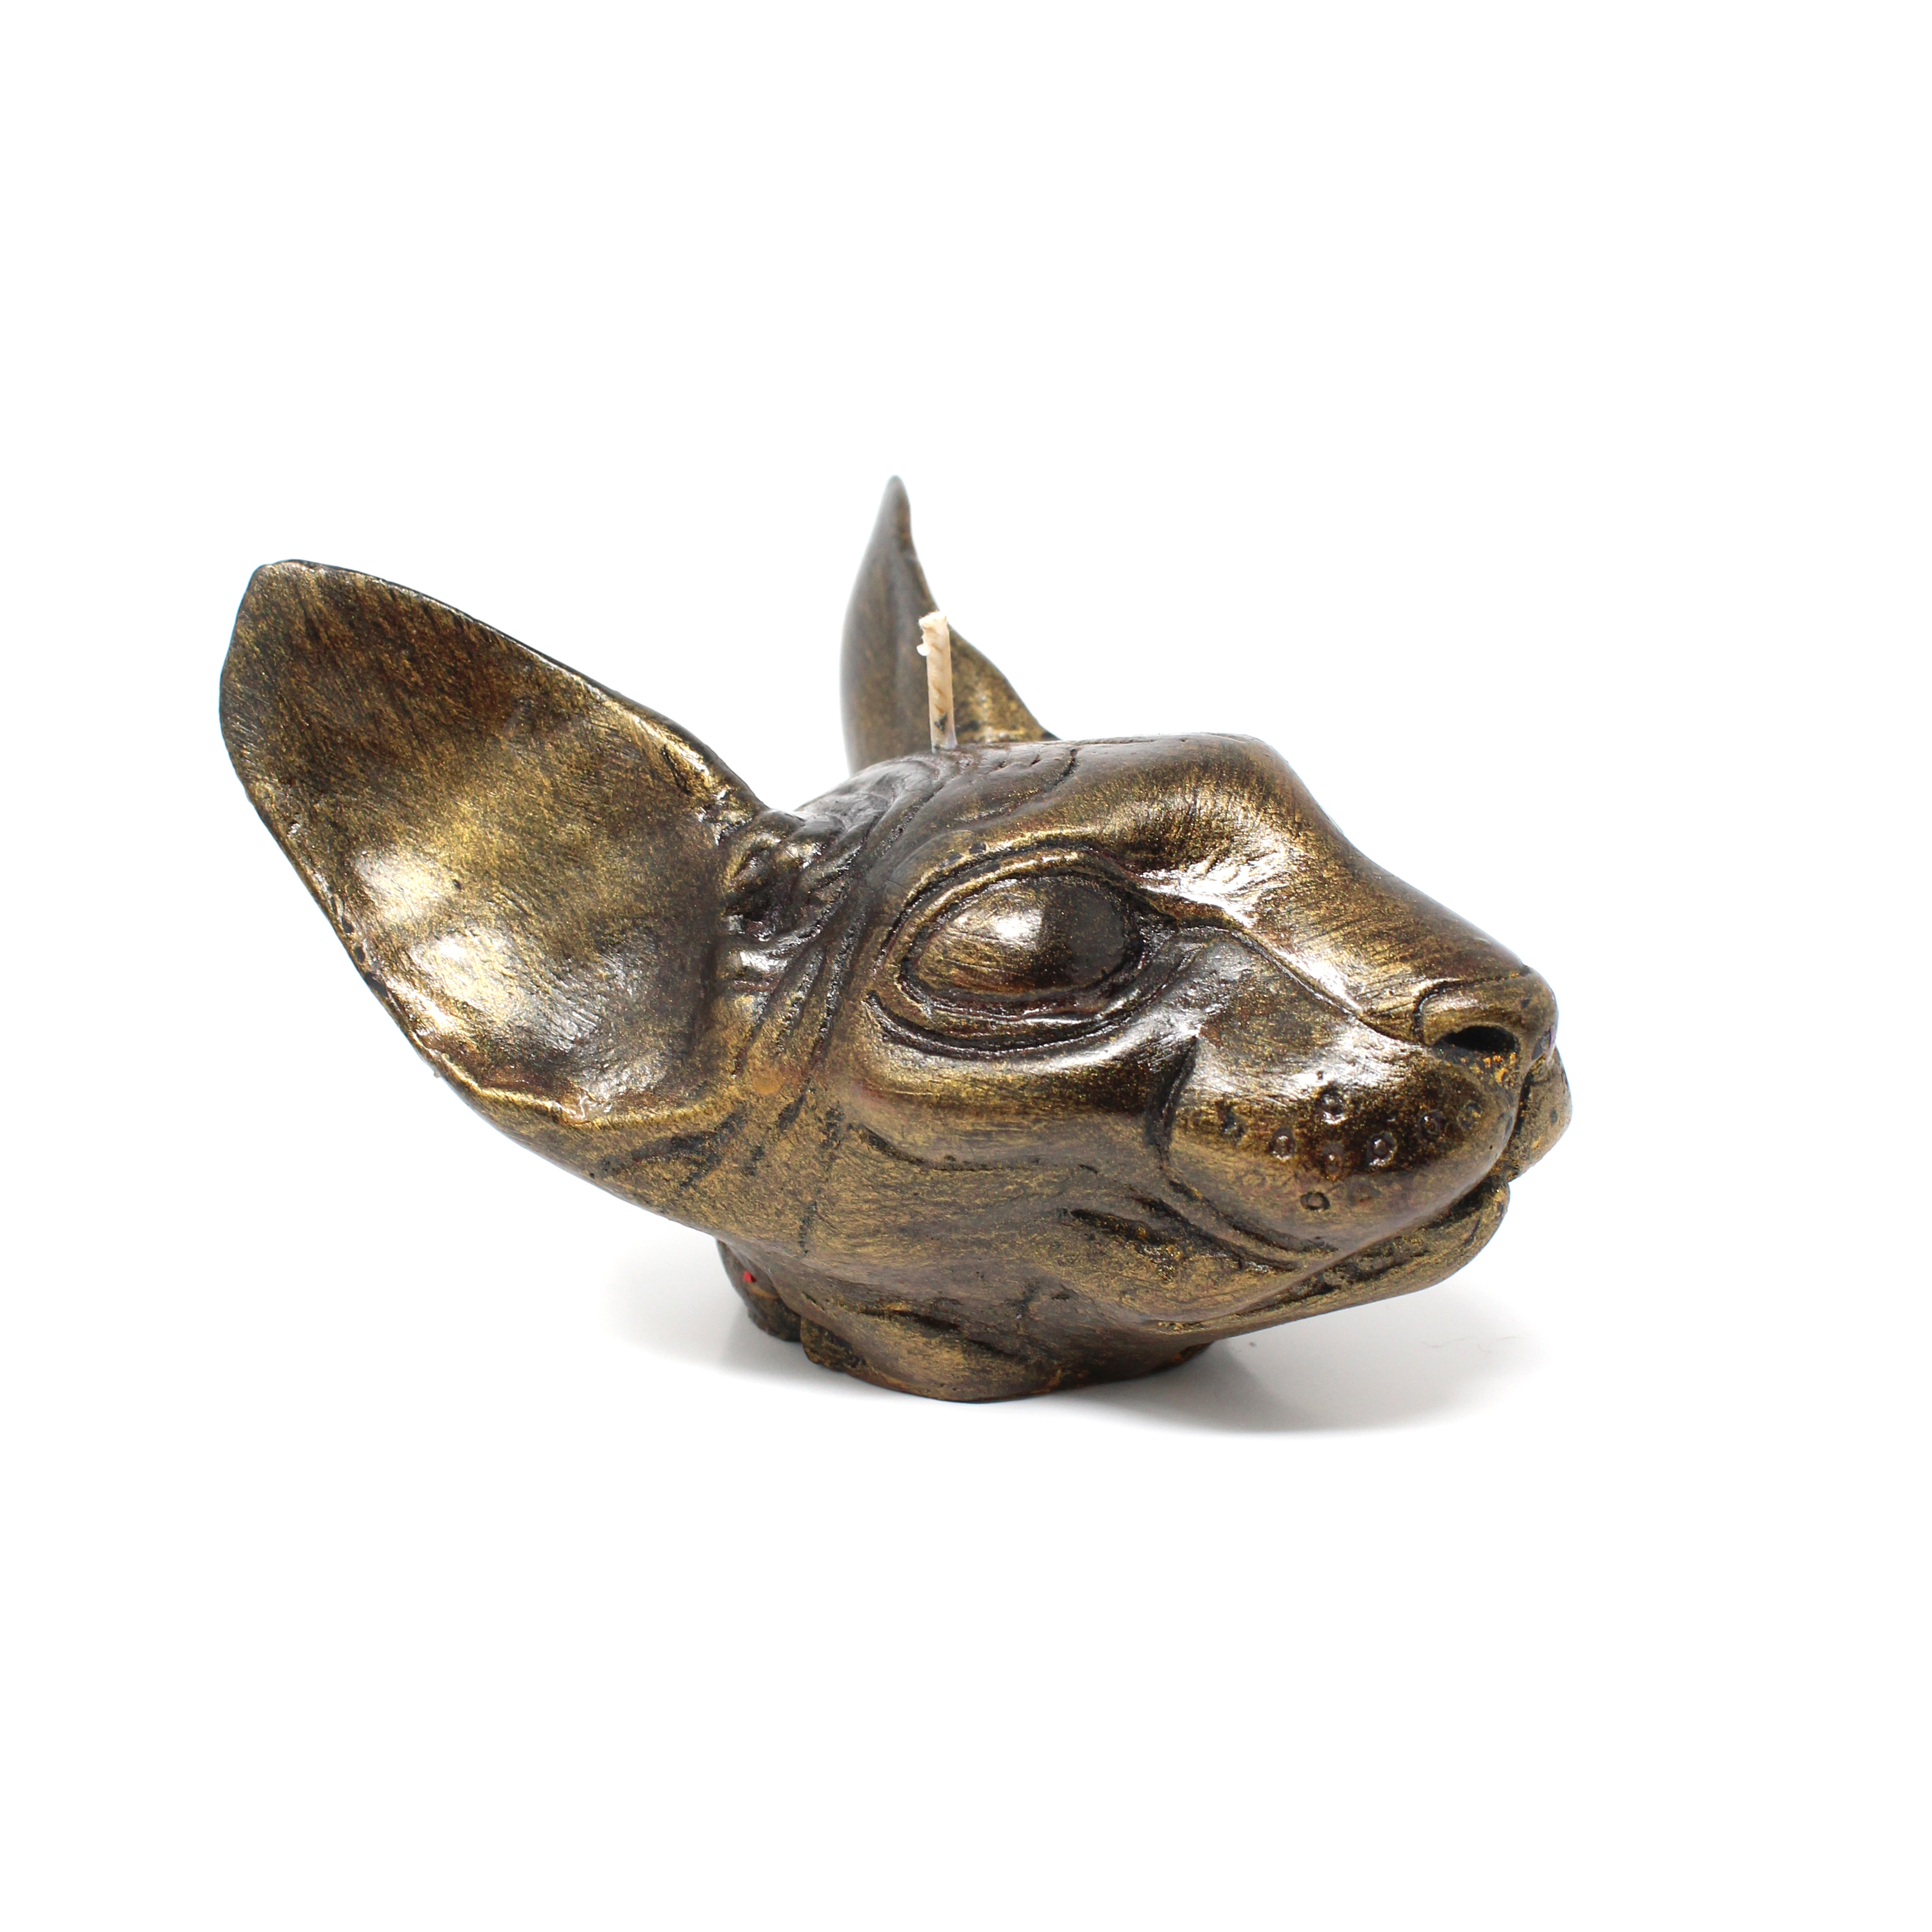 The Blackened Teeth Gold Sphynx Cat Candle